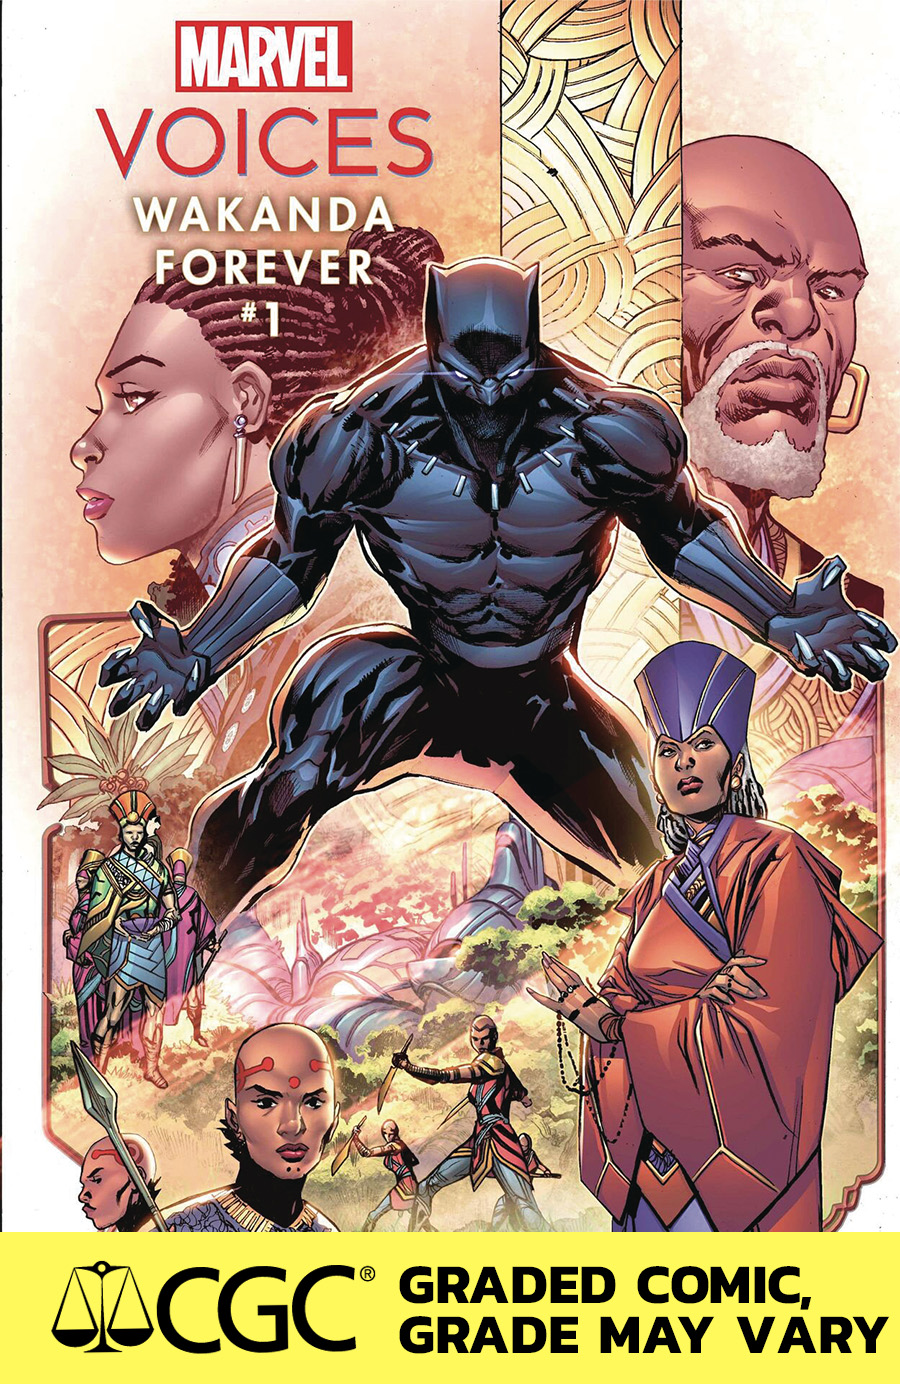 Marvels Voices Wakanda Forever #1 (One Shot) Cover E DF CGC Graded